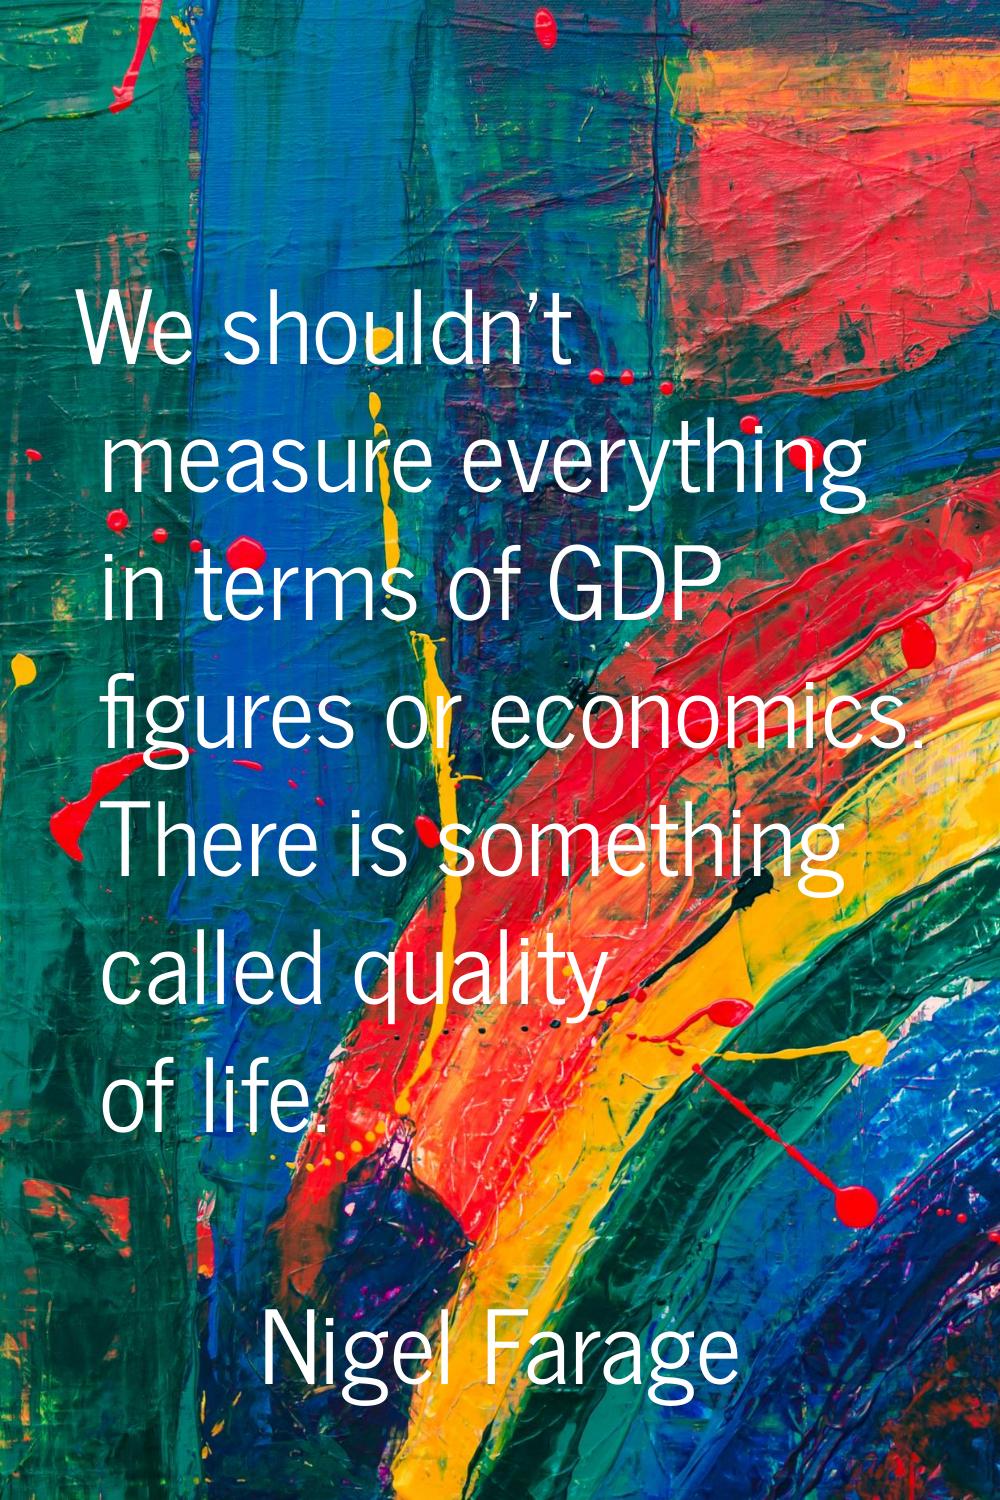 We shouldn't measure everything in terms of GDP figures or economics. There is something called qua